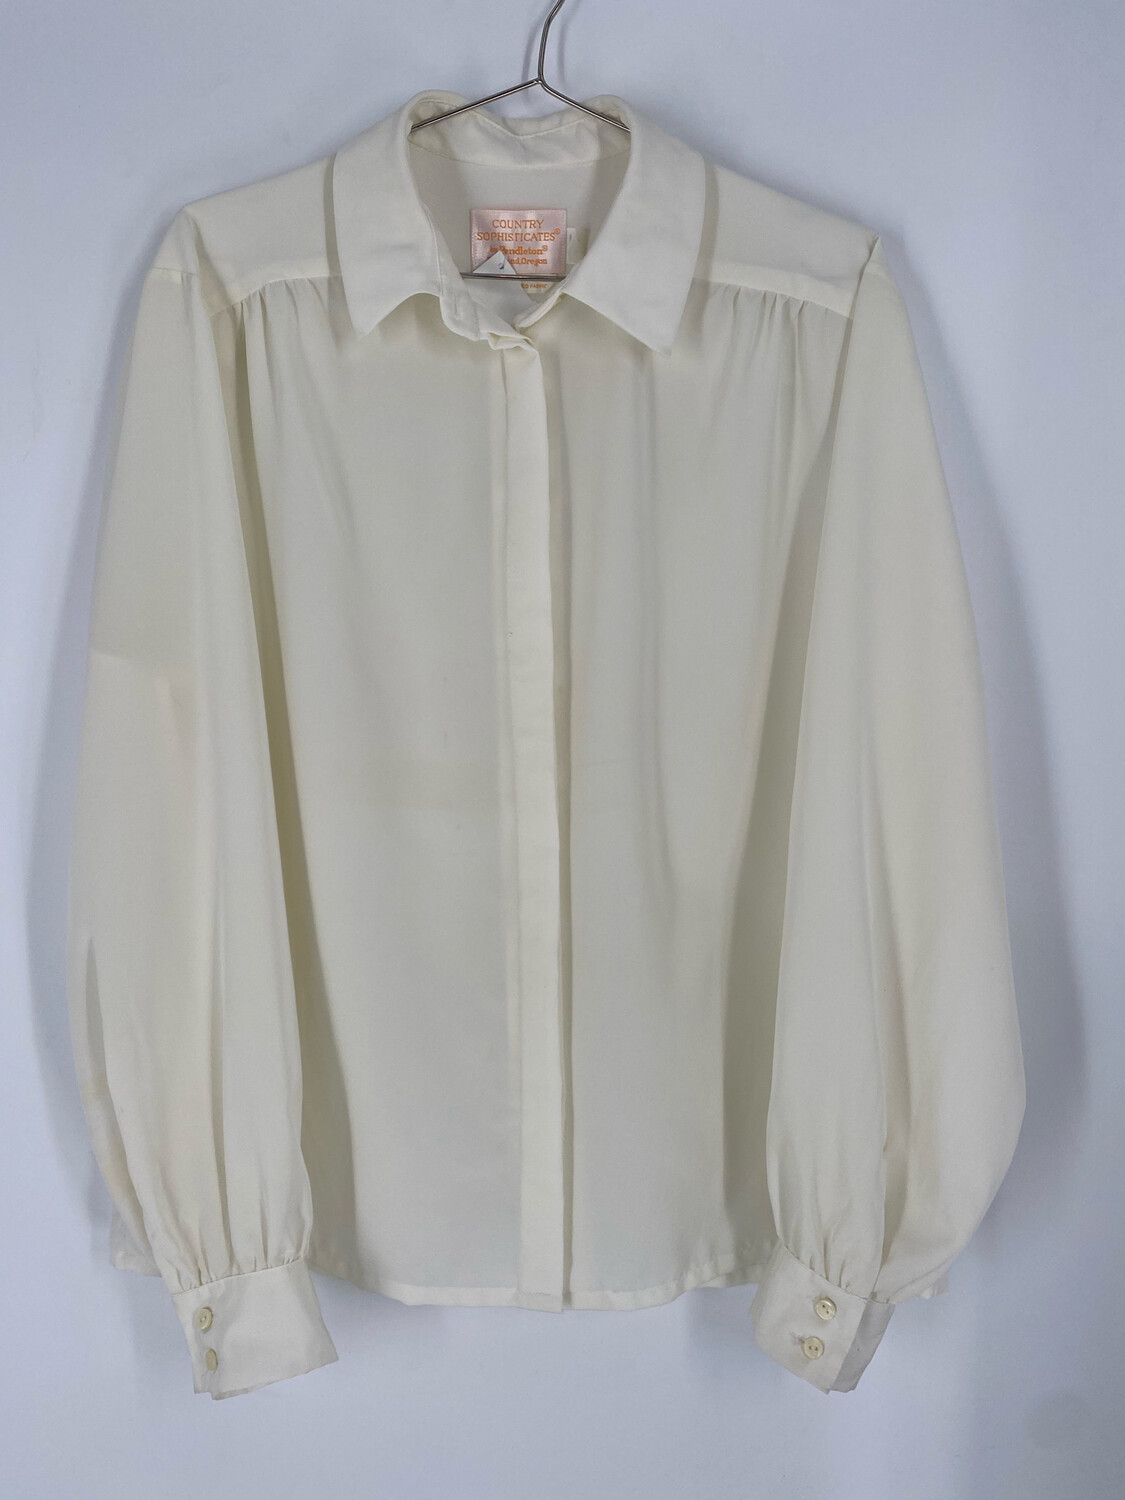 Country Sophisticates By Pendleton Long Sleeve Button Up Top Size 15